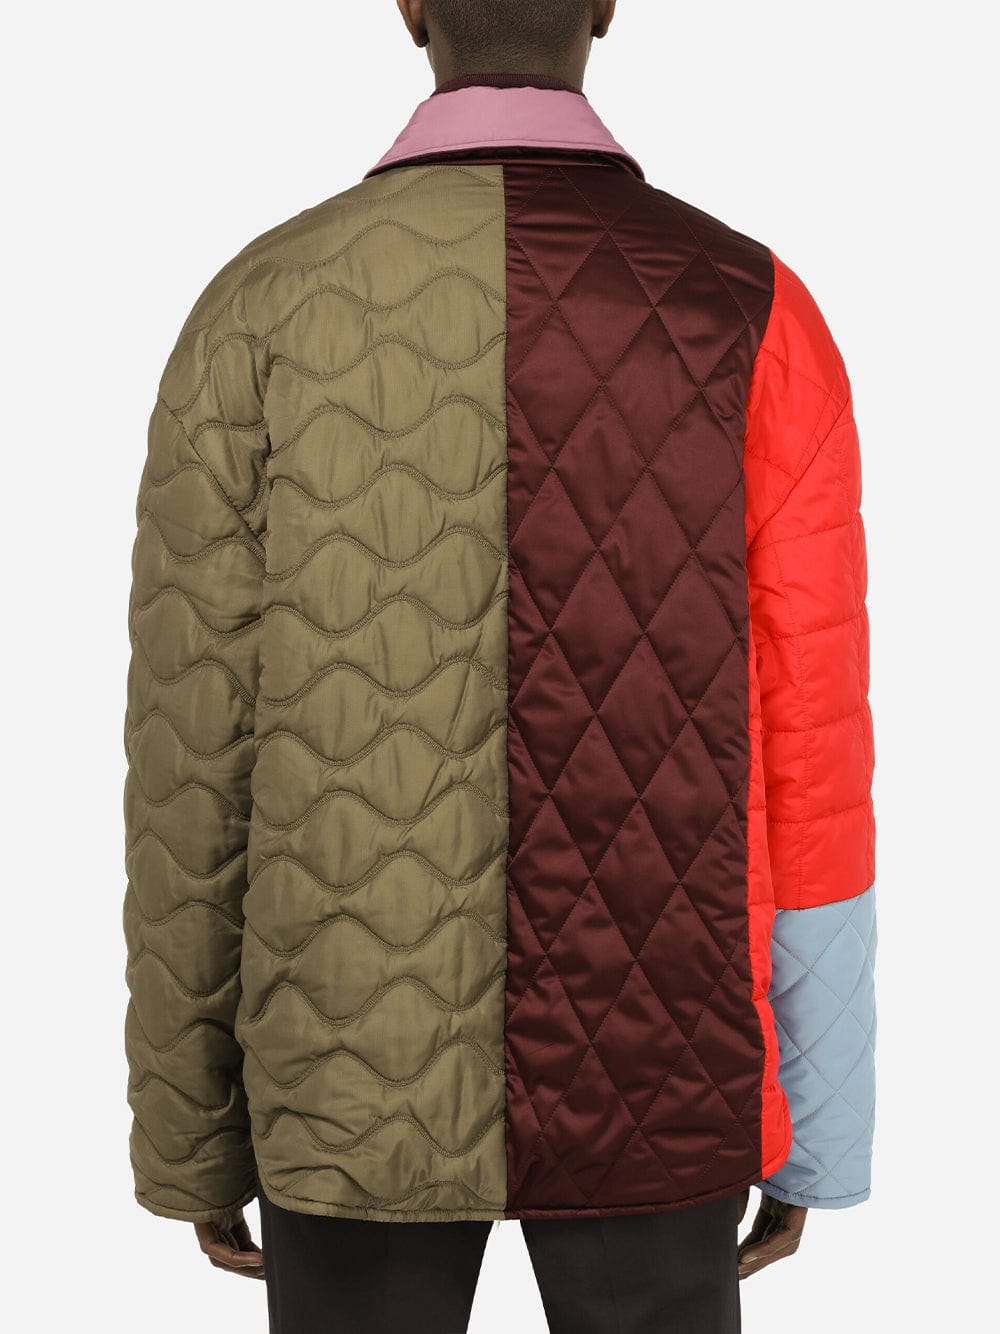 Dolce & Gabbana Reversible Quilted Nylon Jacket With Plate